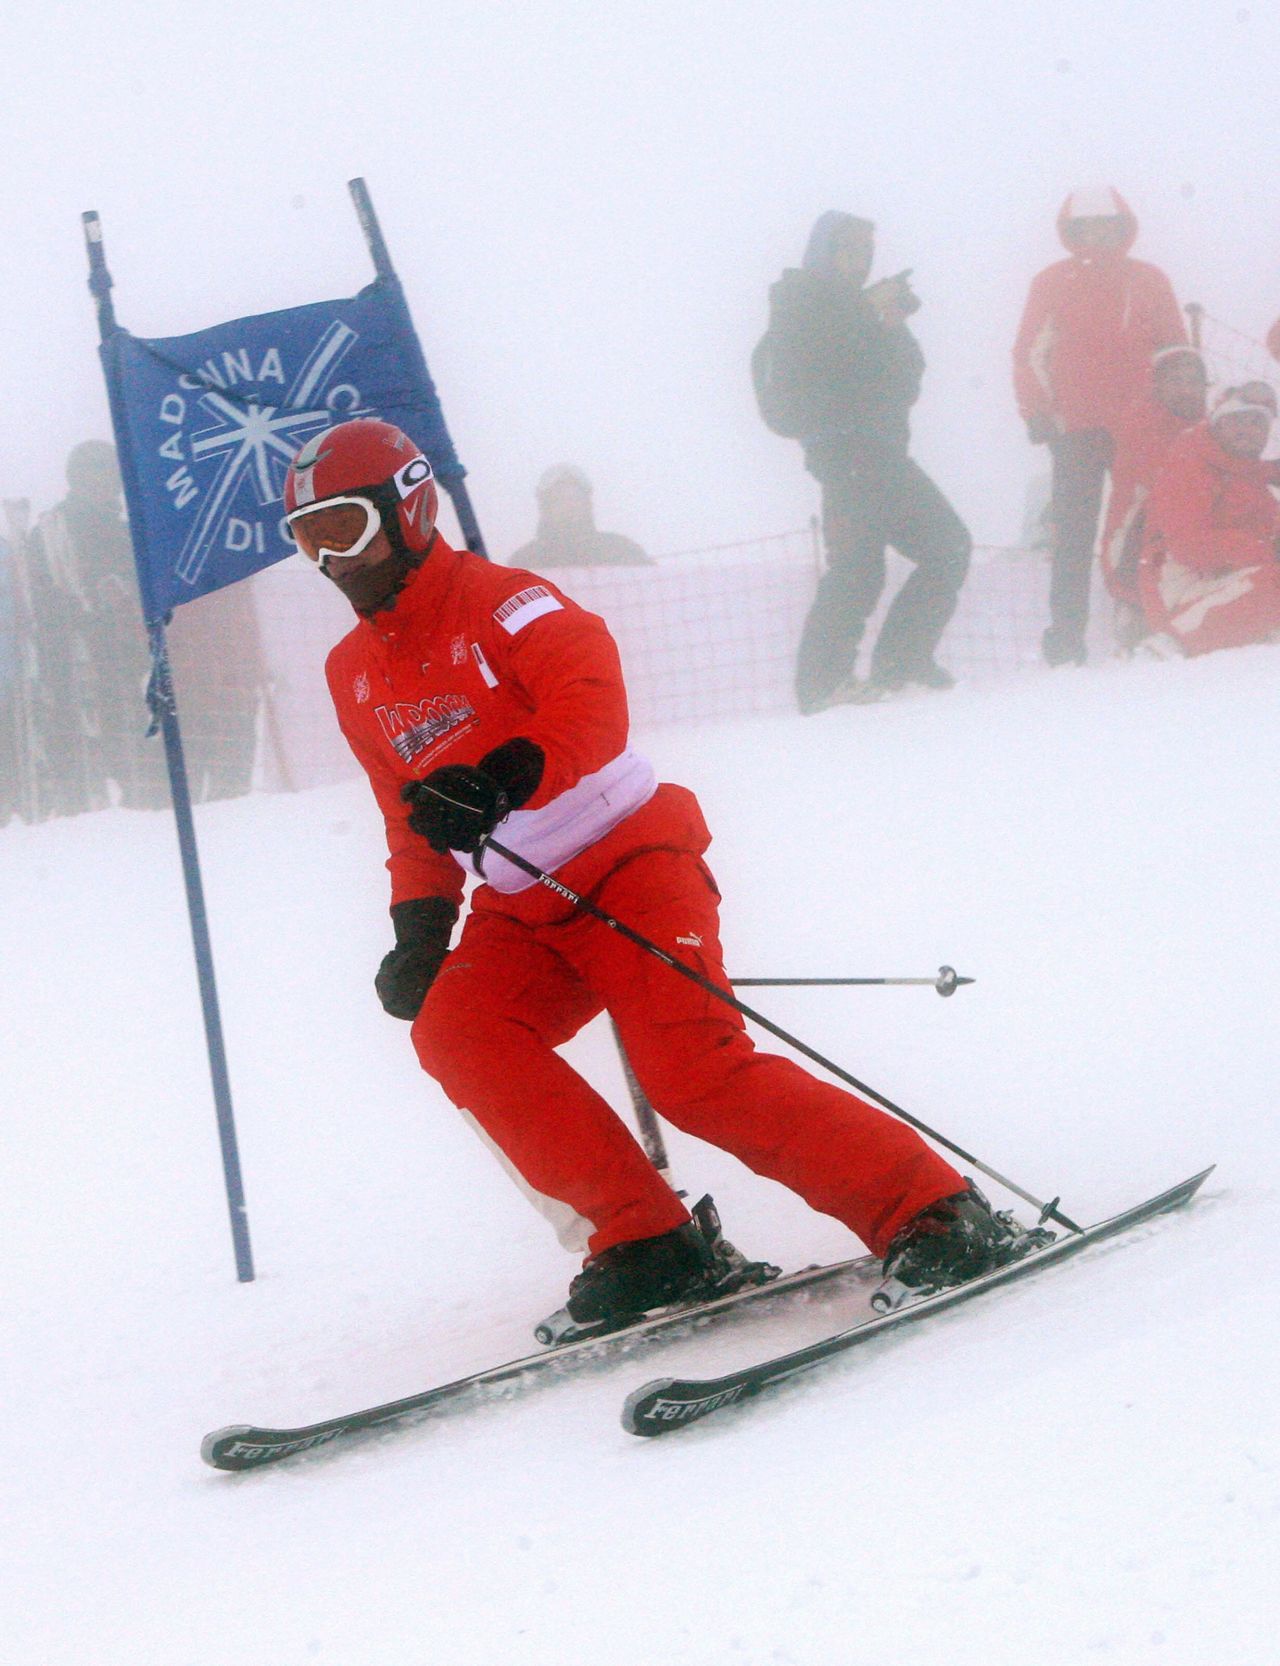 Schumacher skiing in Madonna di Campiglio in January 2008. "My colleagues and I in the snow sports medicine fraternity continue to recommend that all skiers and snowboarders wear an appropriately sized and designed helmet on the slopes," Langran said in a statement on website <a href="http://www.ski-injury.com/uploads/fck/file/Schumacher%20statement%2012_13.pdf" target="_blank" target="_blank">www.ski-injury.com</a> on Monday.<br />